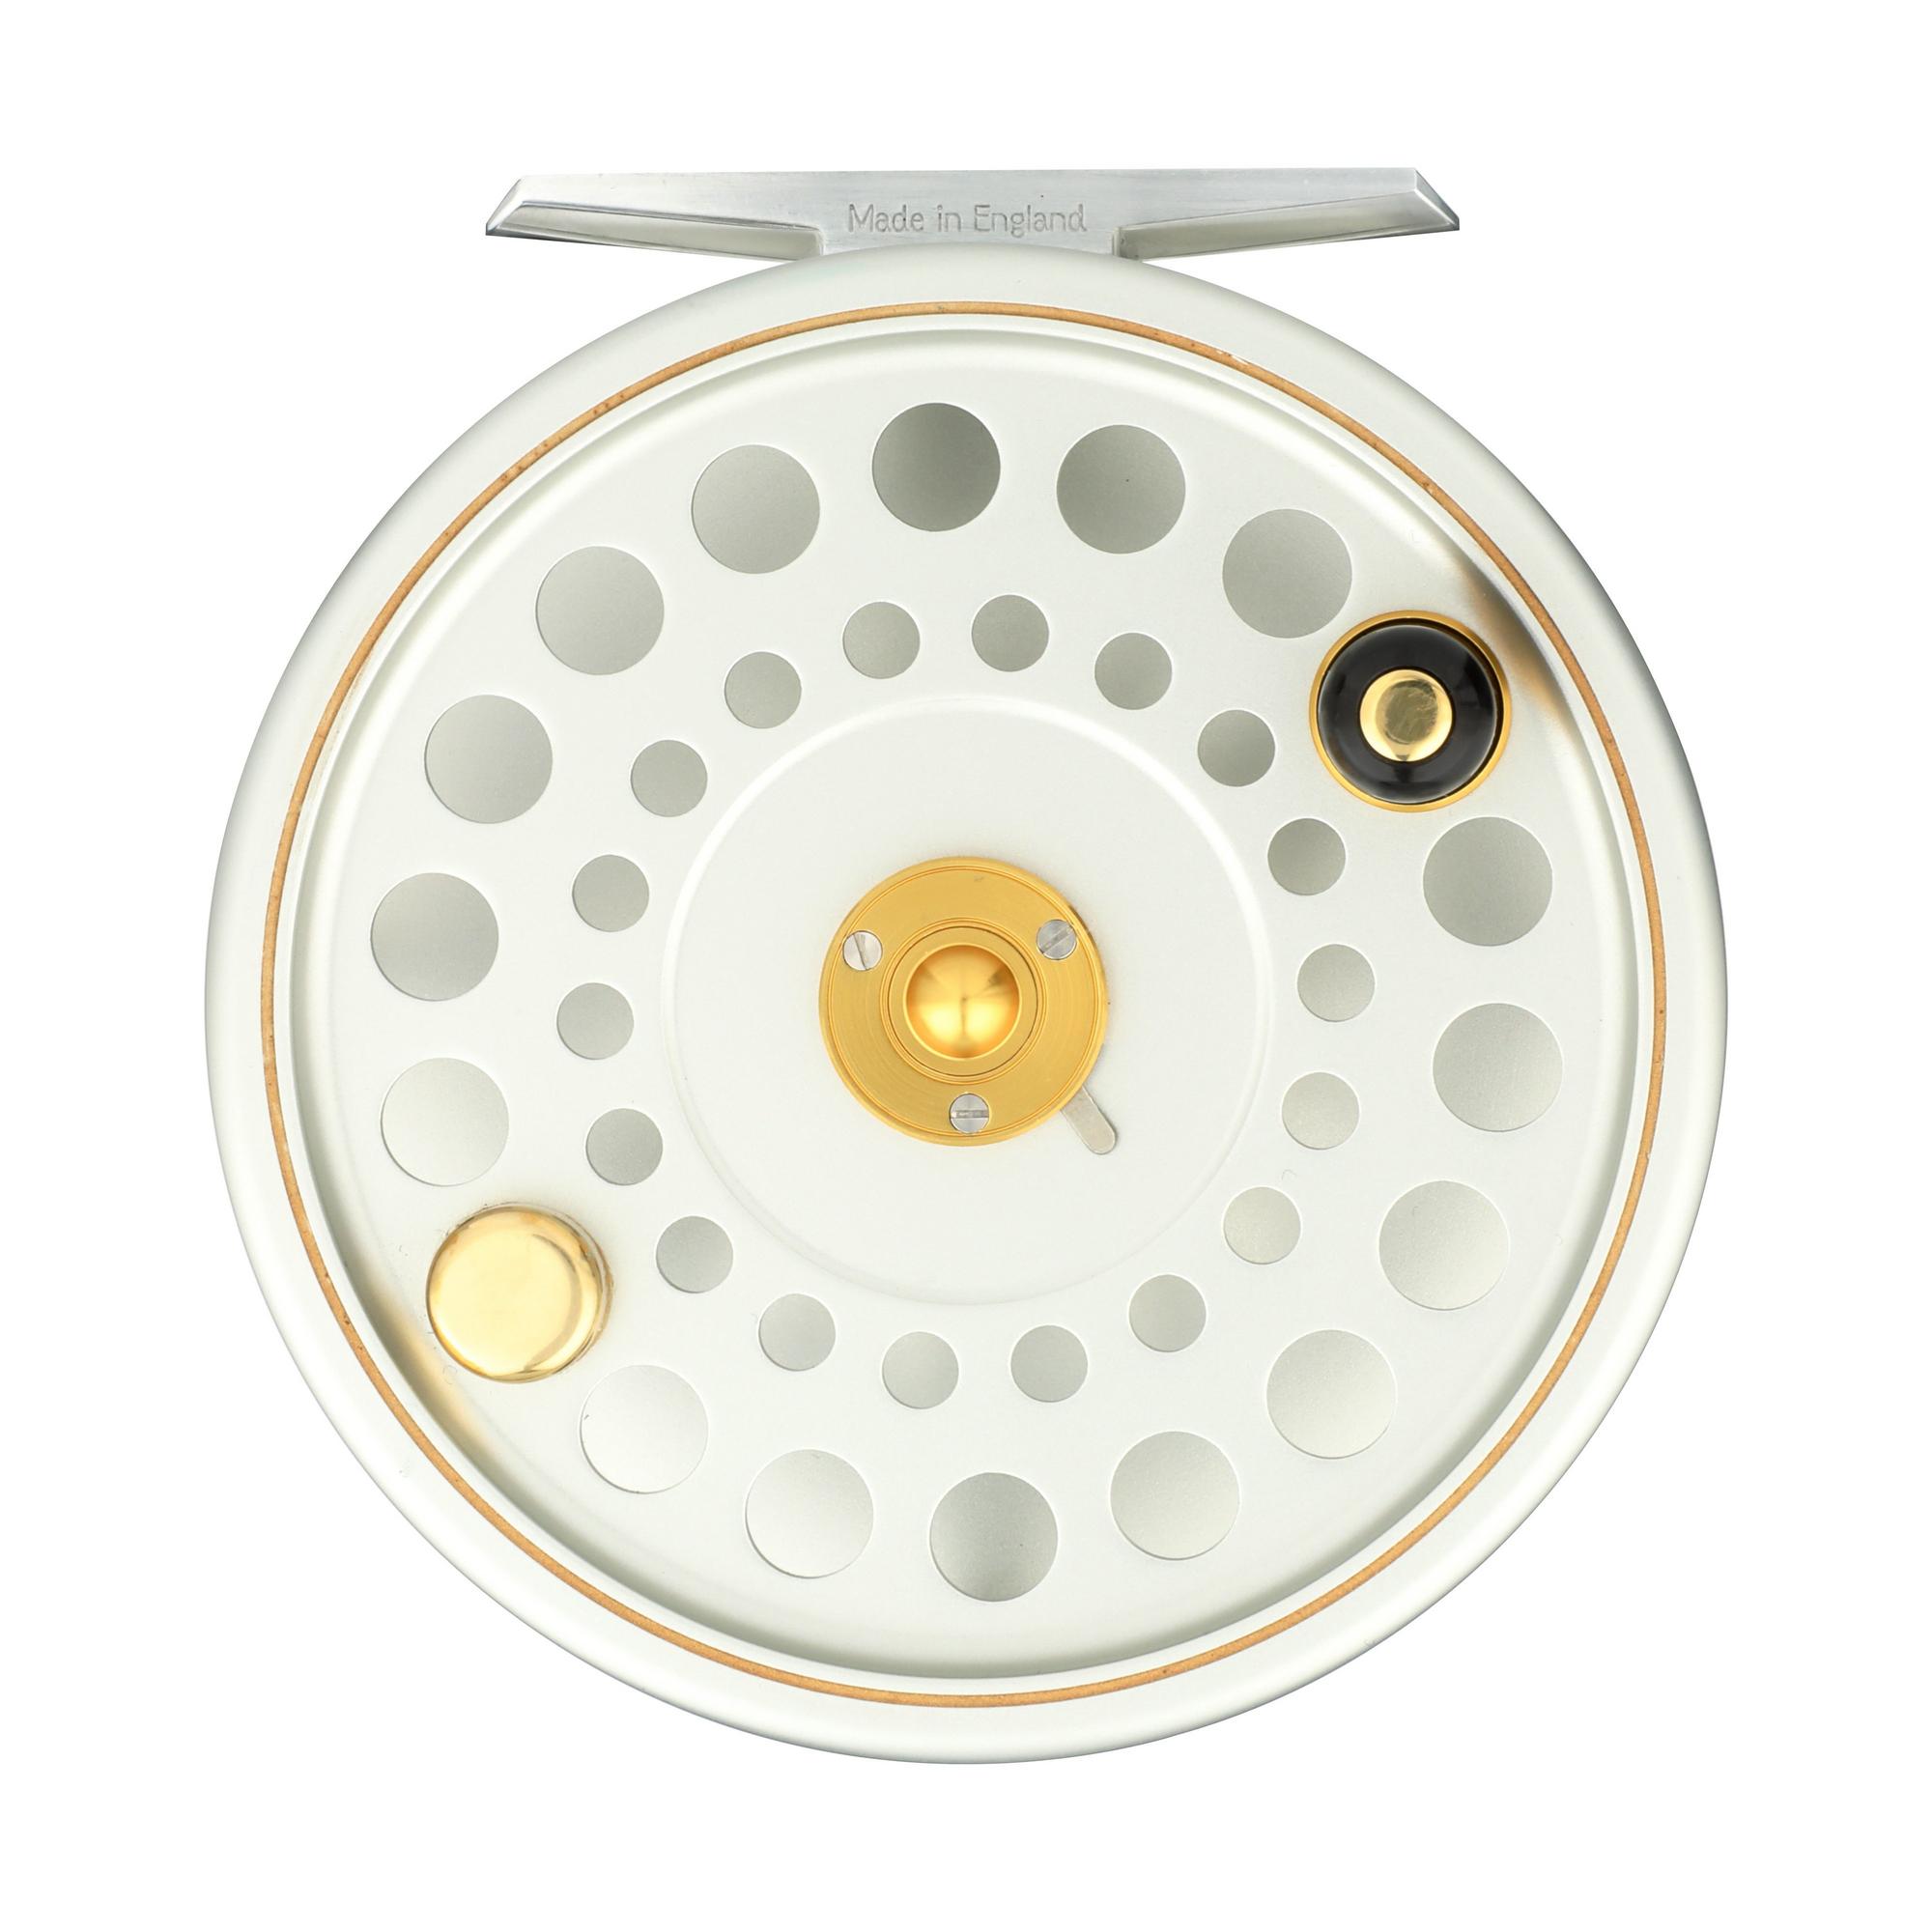 Hardy Sovereign Fly Reel - 8/9 - Spitfire